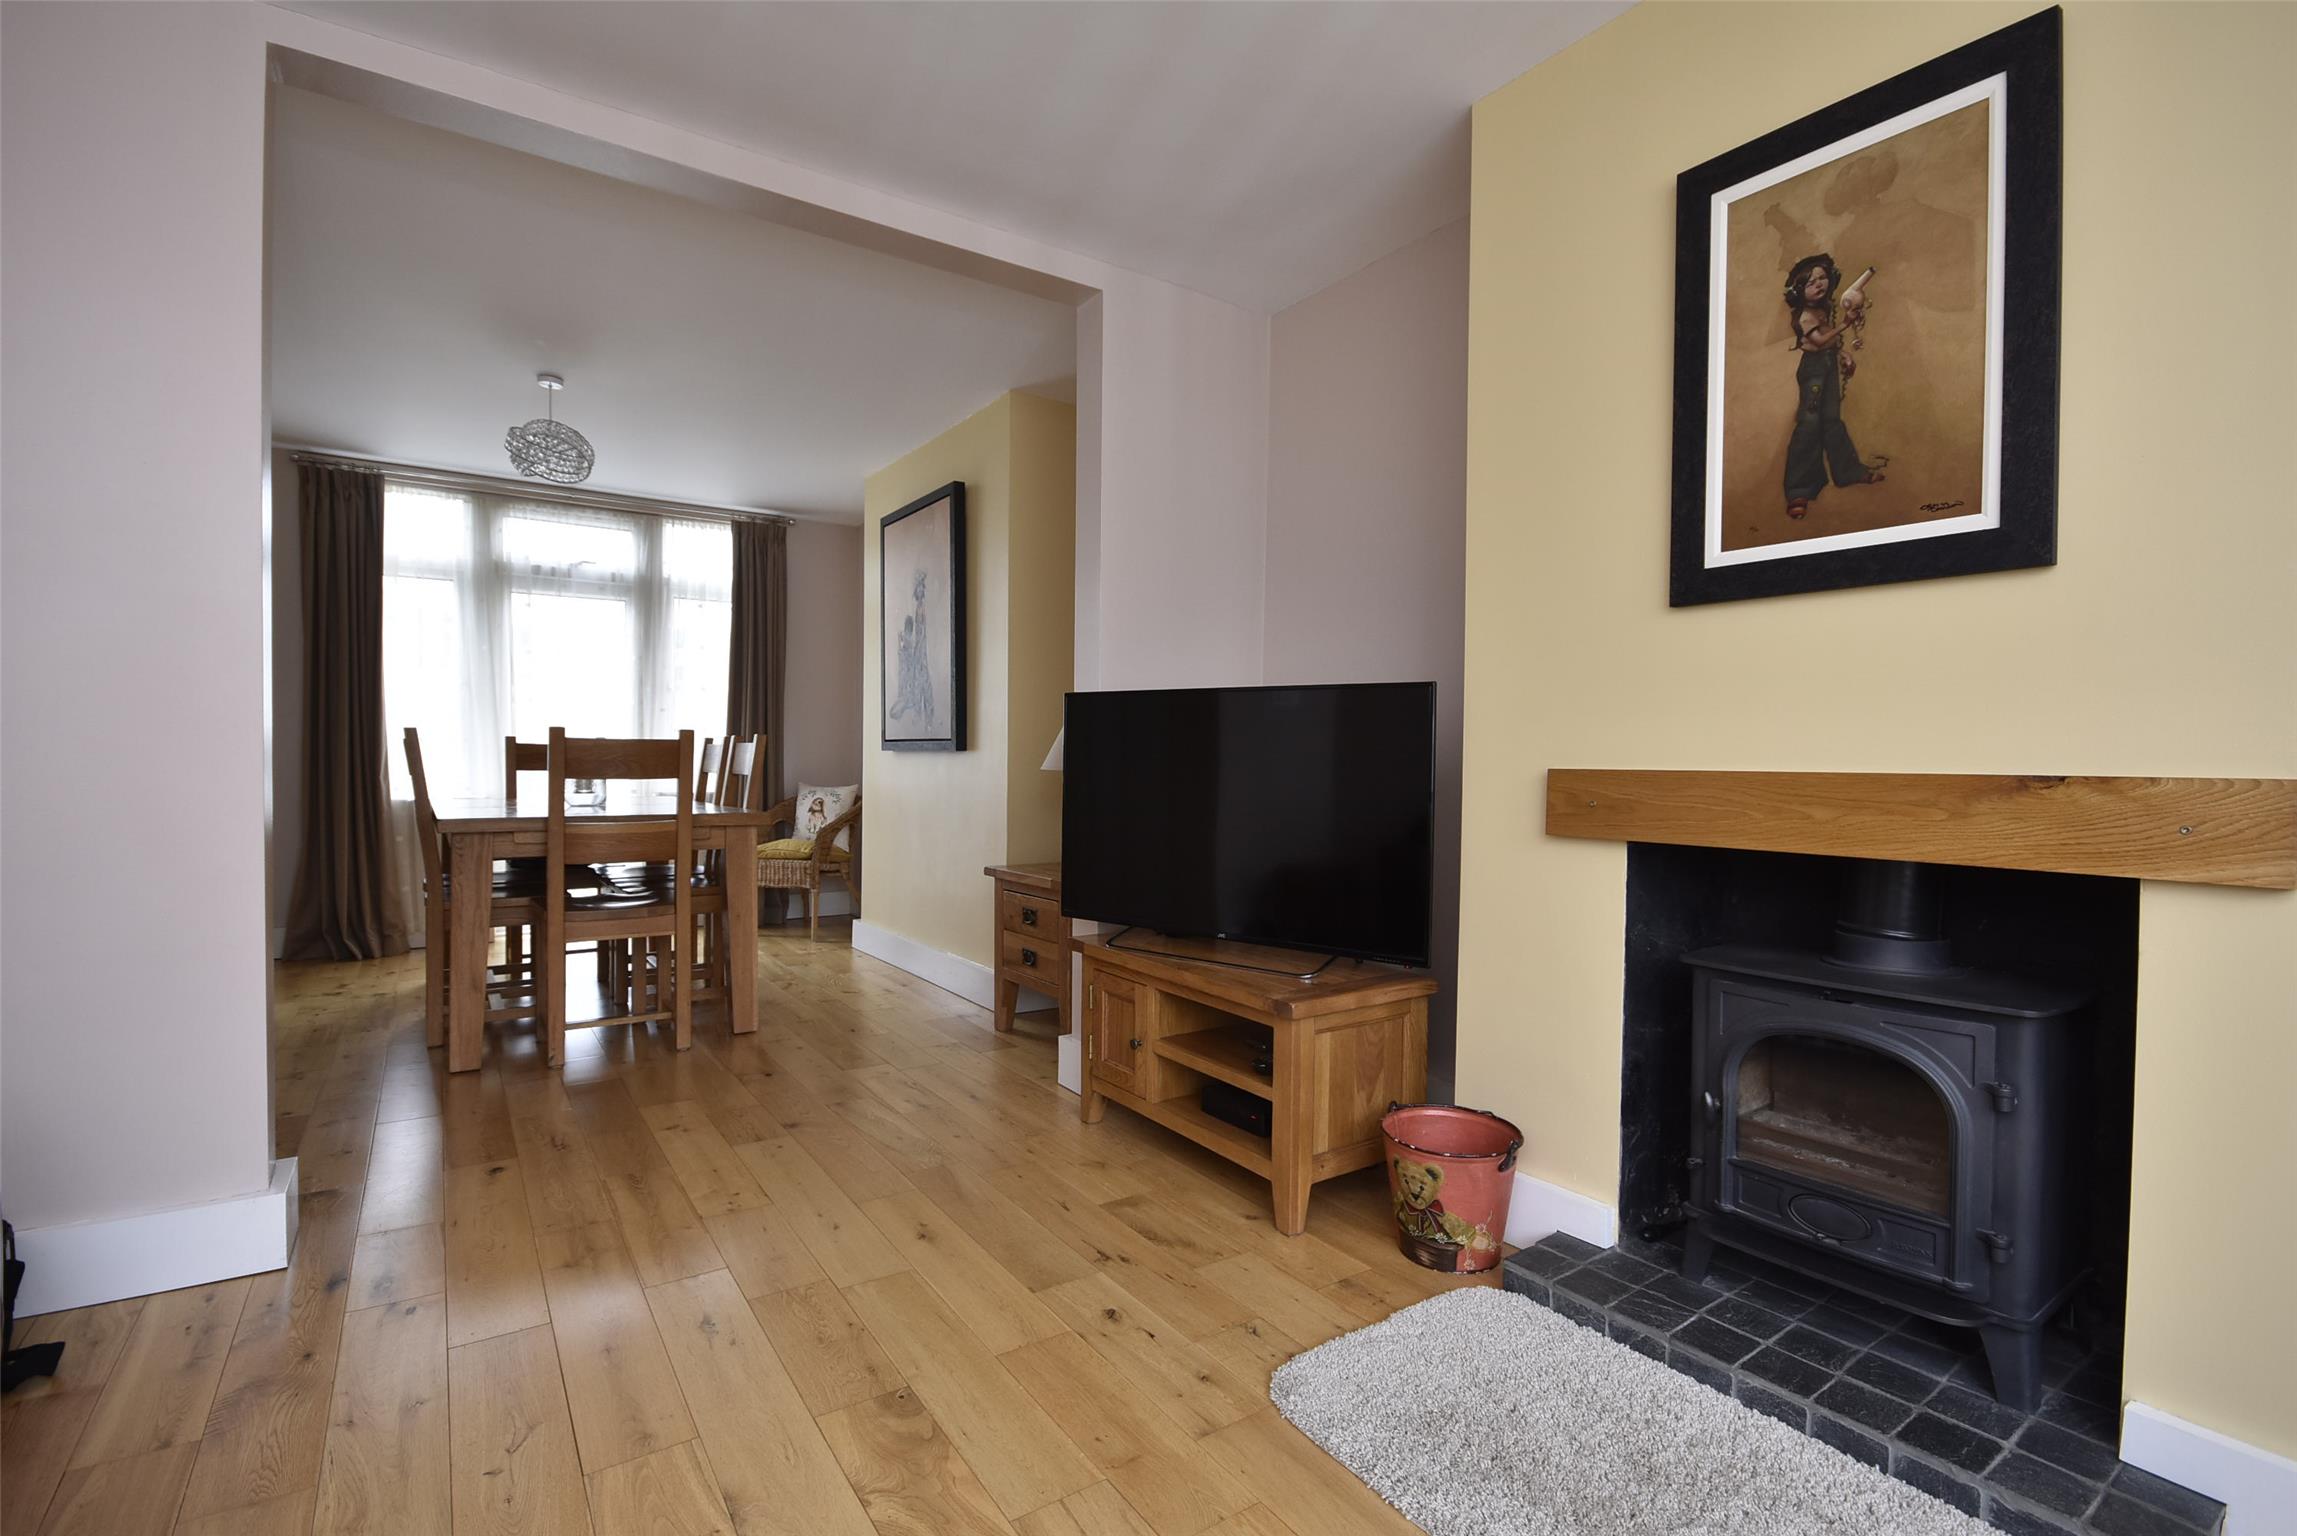 Bowling Green Fireplace New 3 Bedroom Terraced House Swiss Drive ashton Vale Bristol